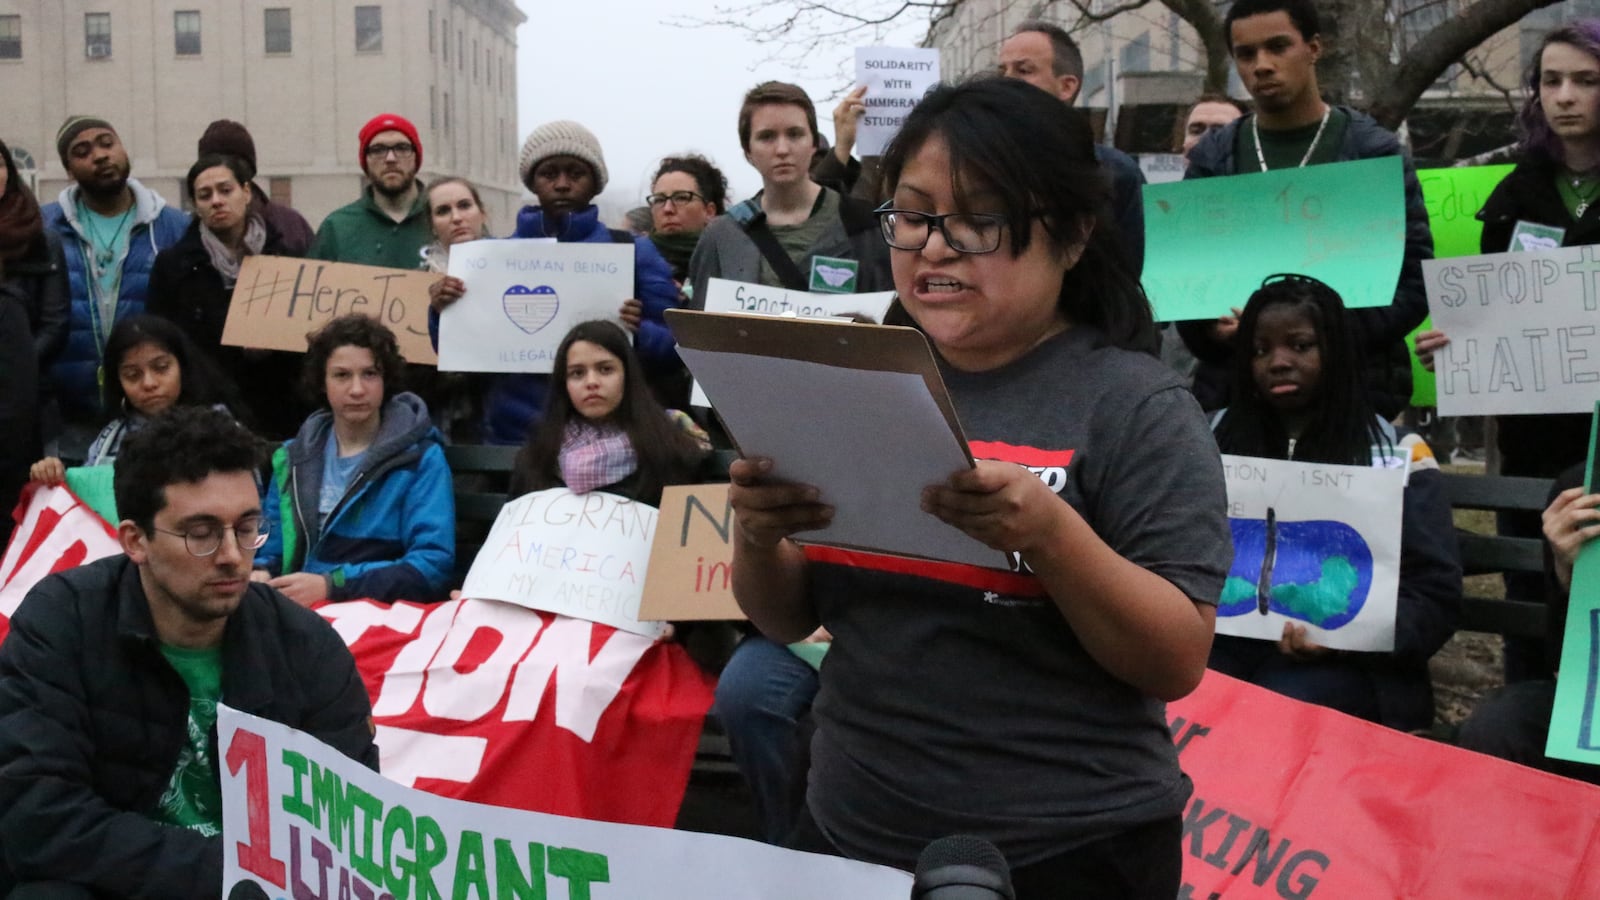 Diana Eusebio, an advocate with New York State Leadership Council, speaks at a rally asking the Department of Education to do more for immigrant students.